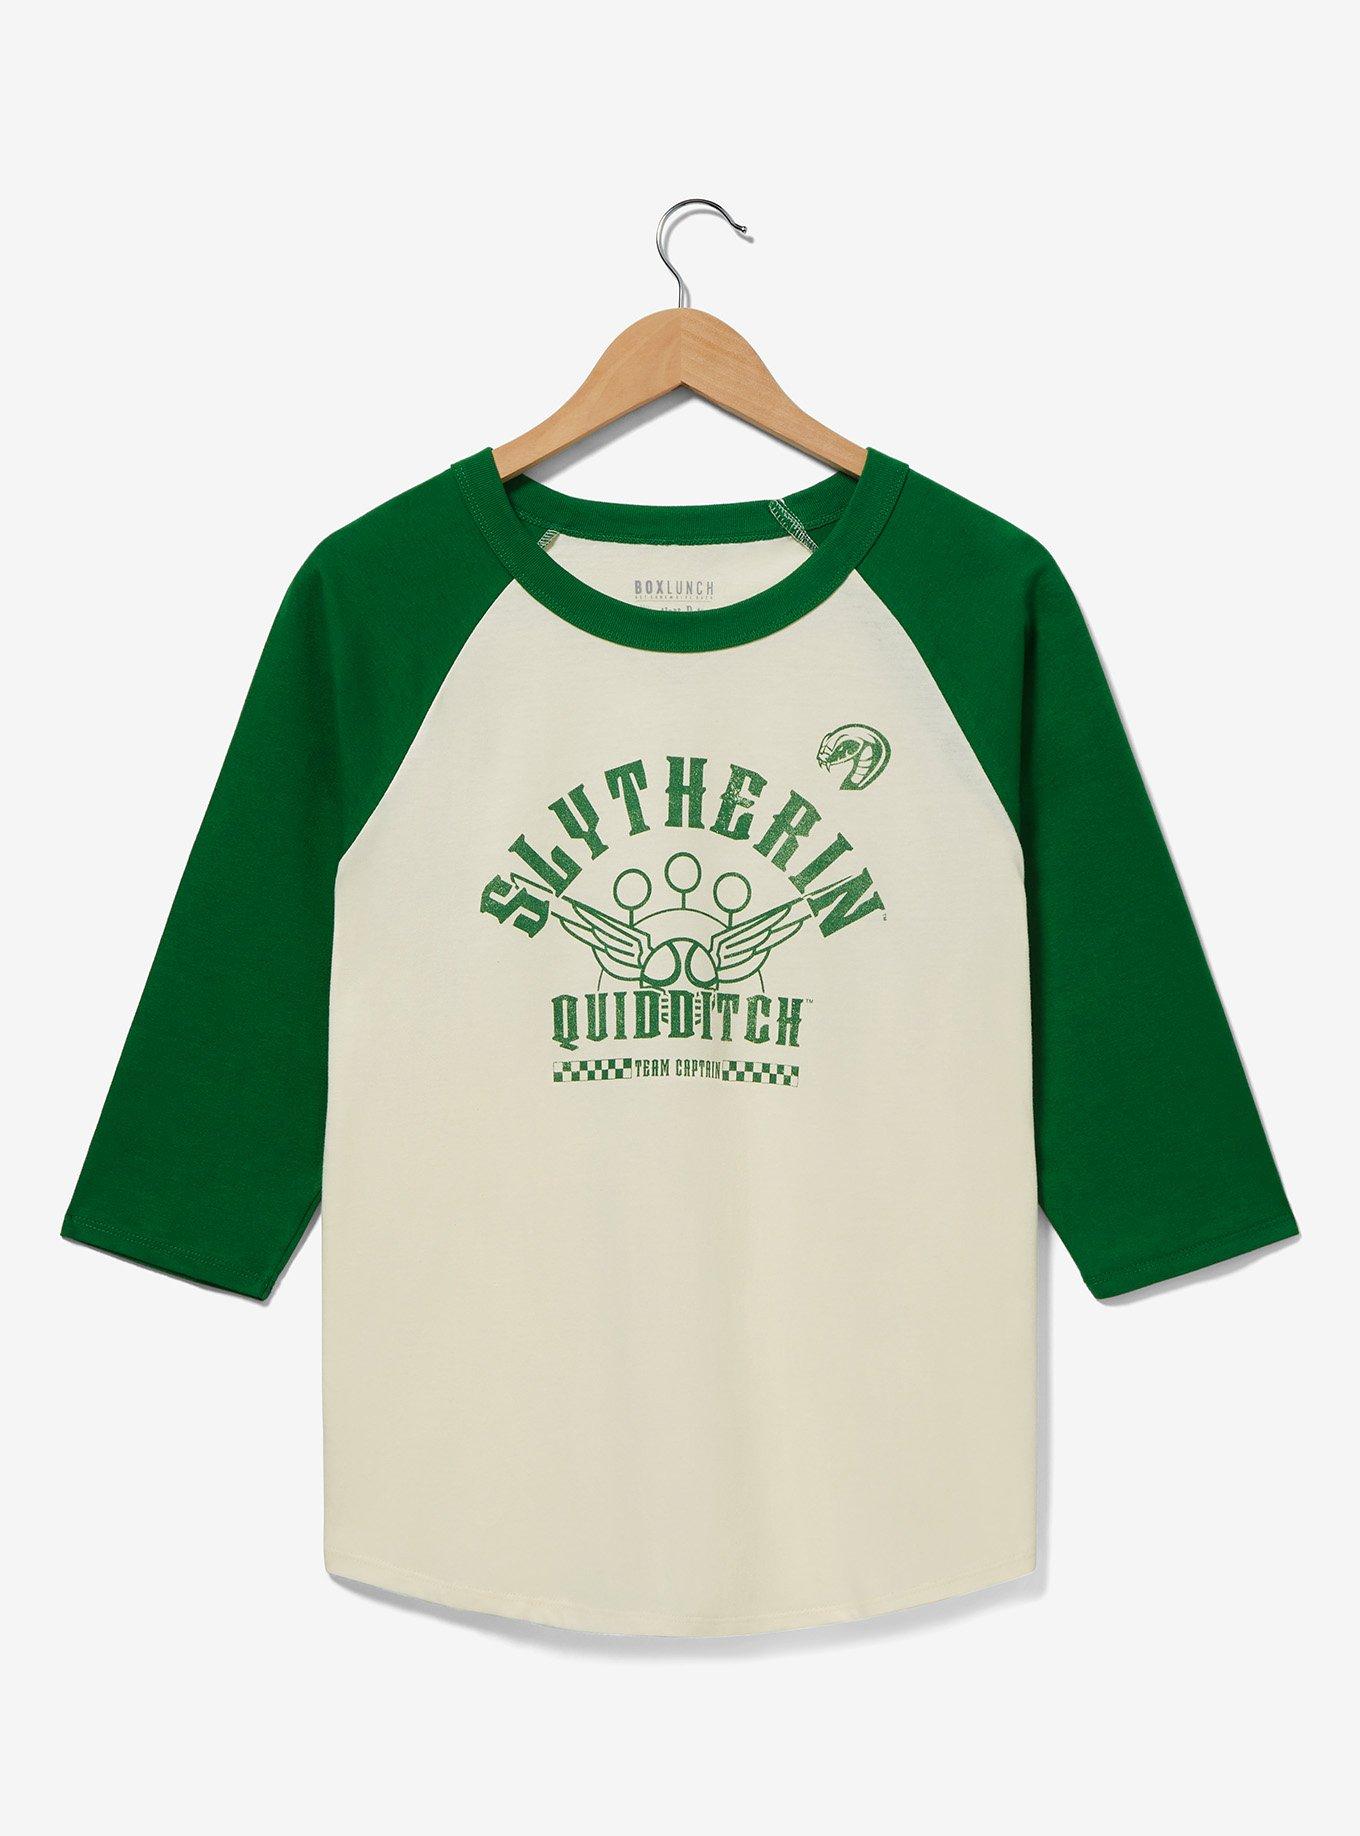 Harry Potter Slytherin Quidditch Raglan T-Shirt - BoxLunch Exclusive |  BoxLunch